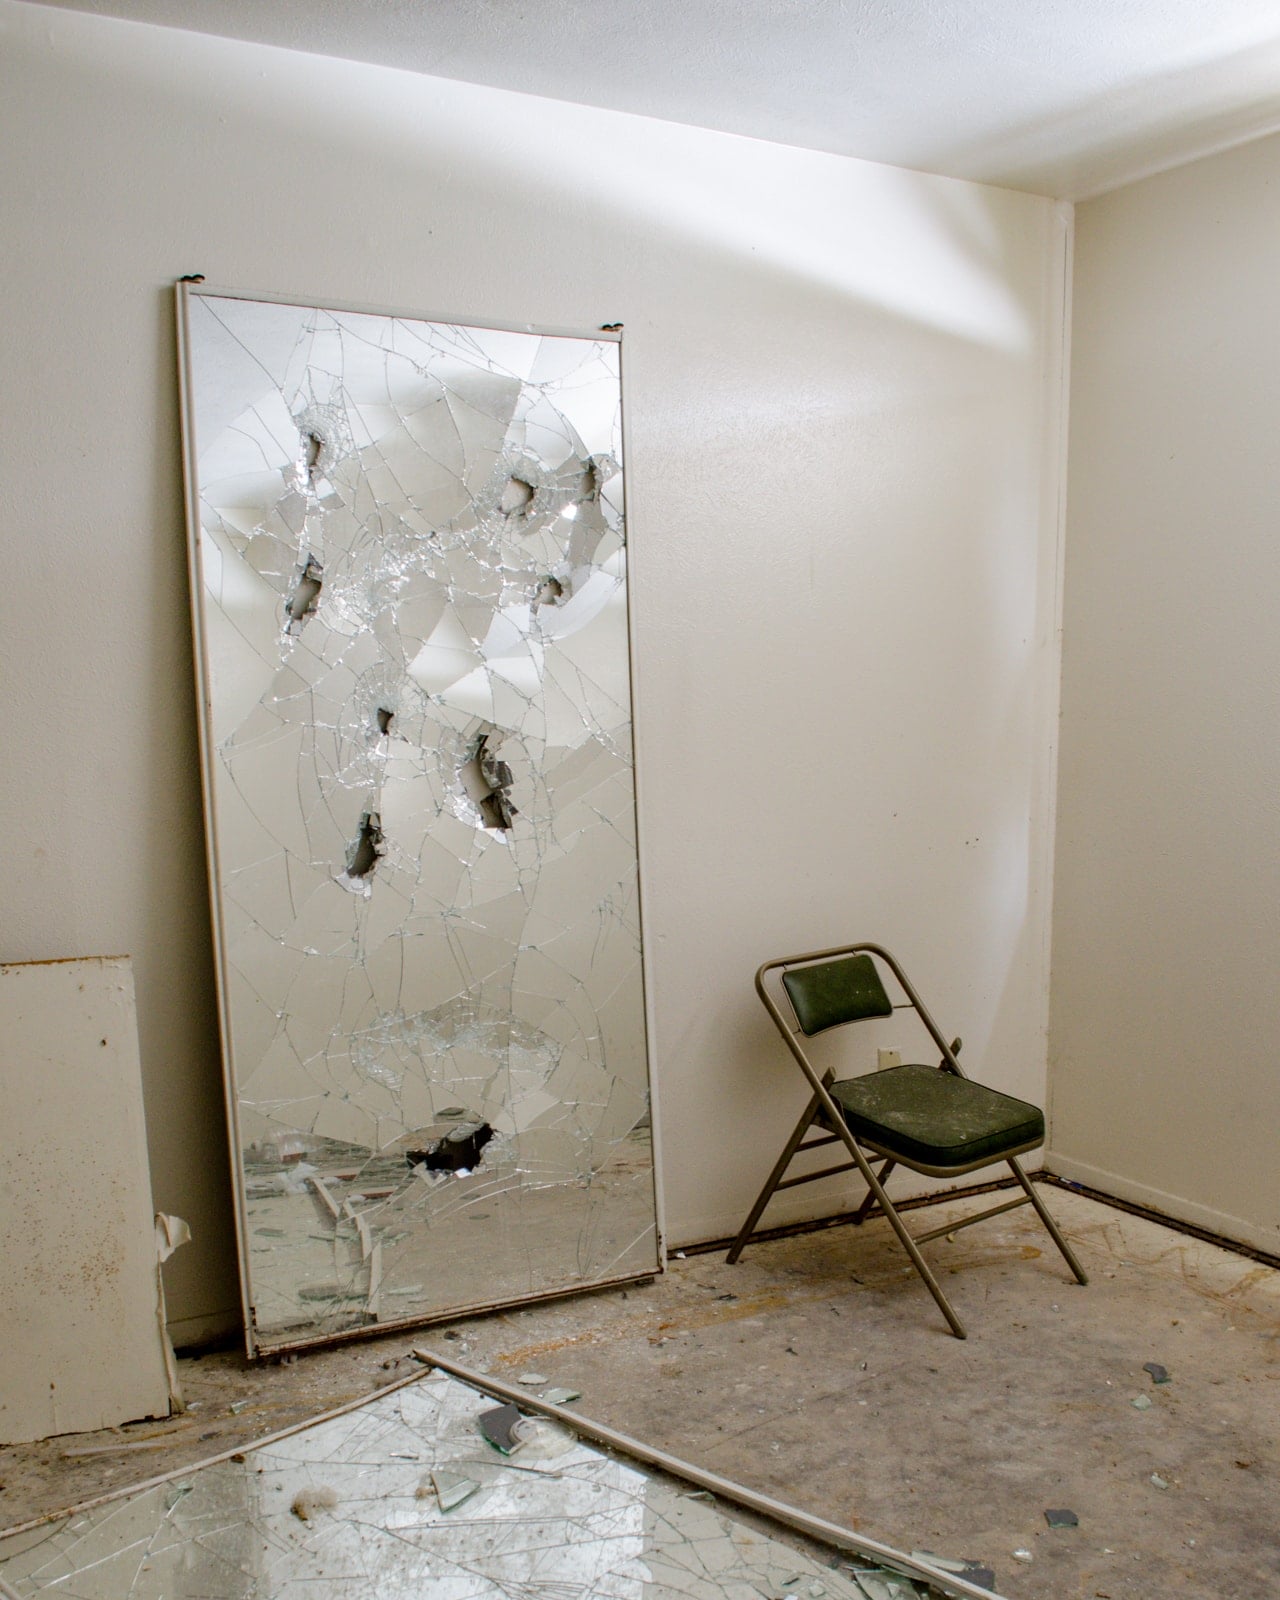 Broken mirrors in an abandoned apartment urbex